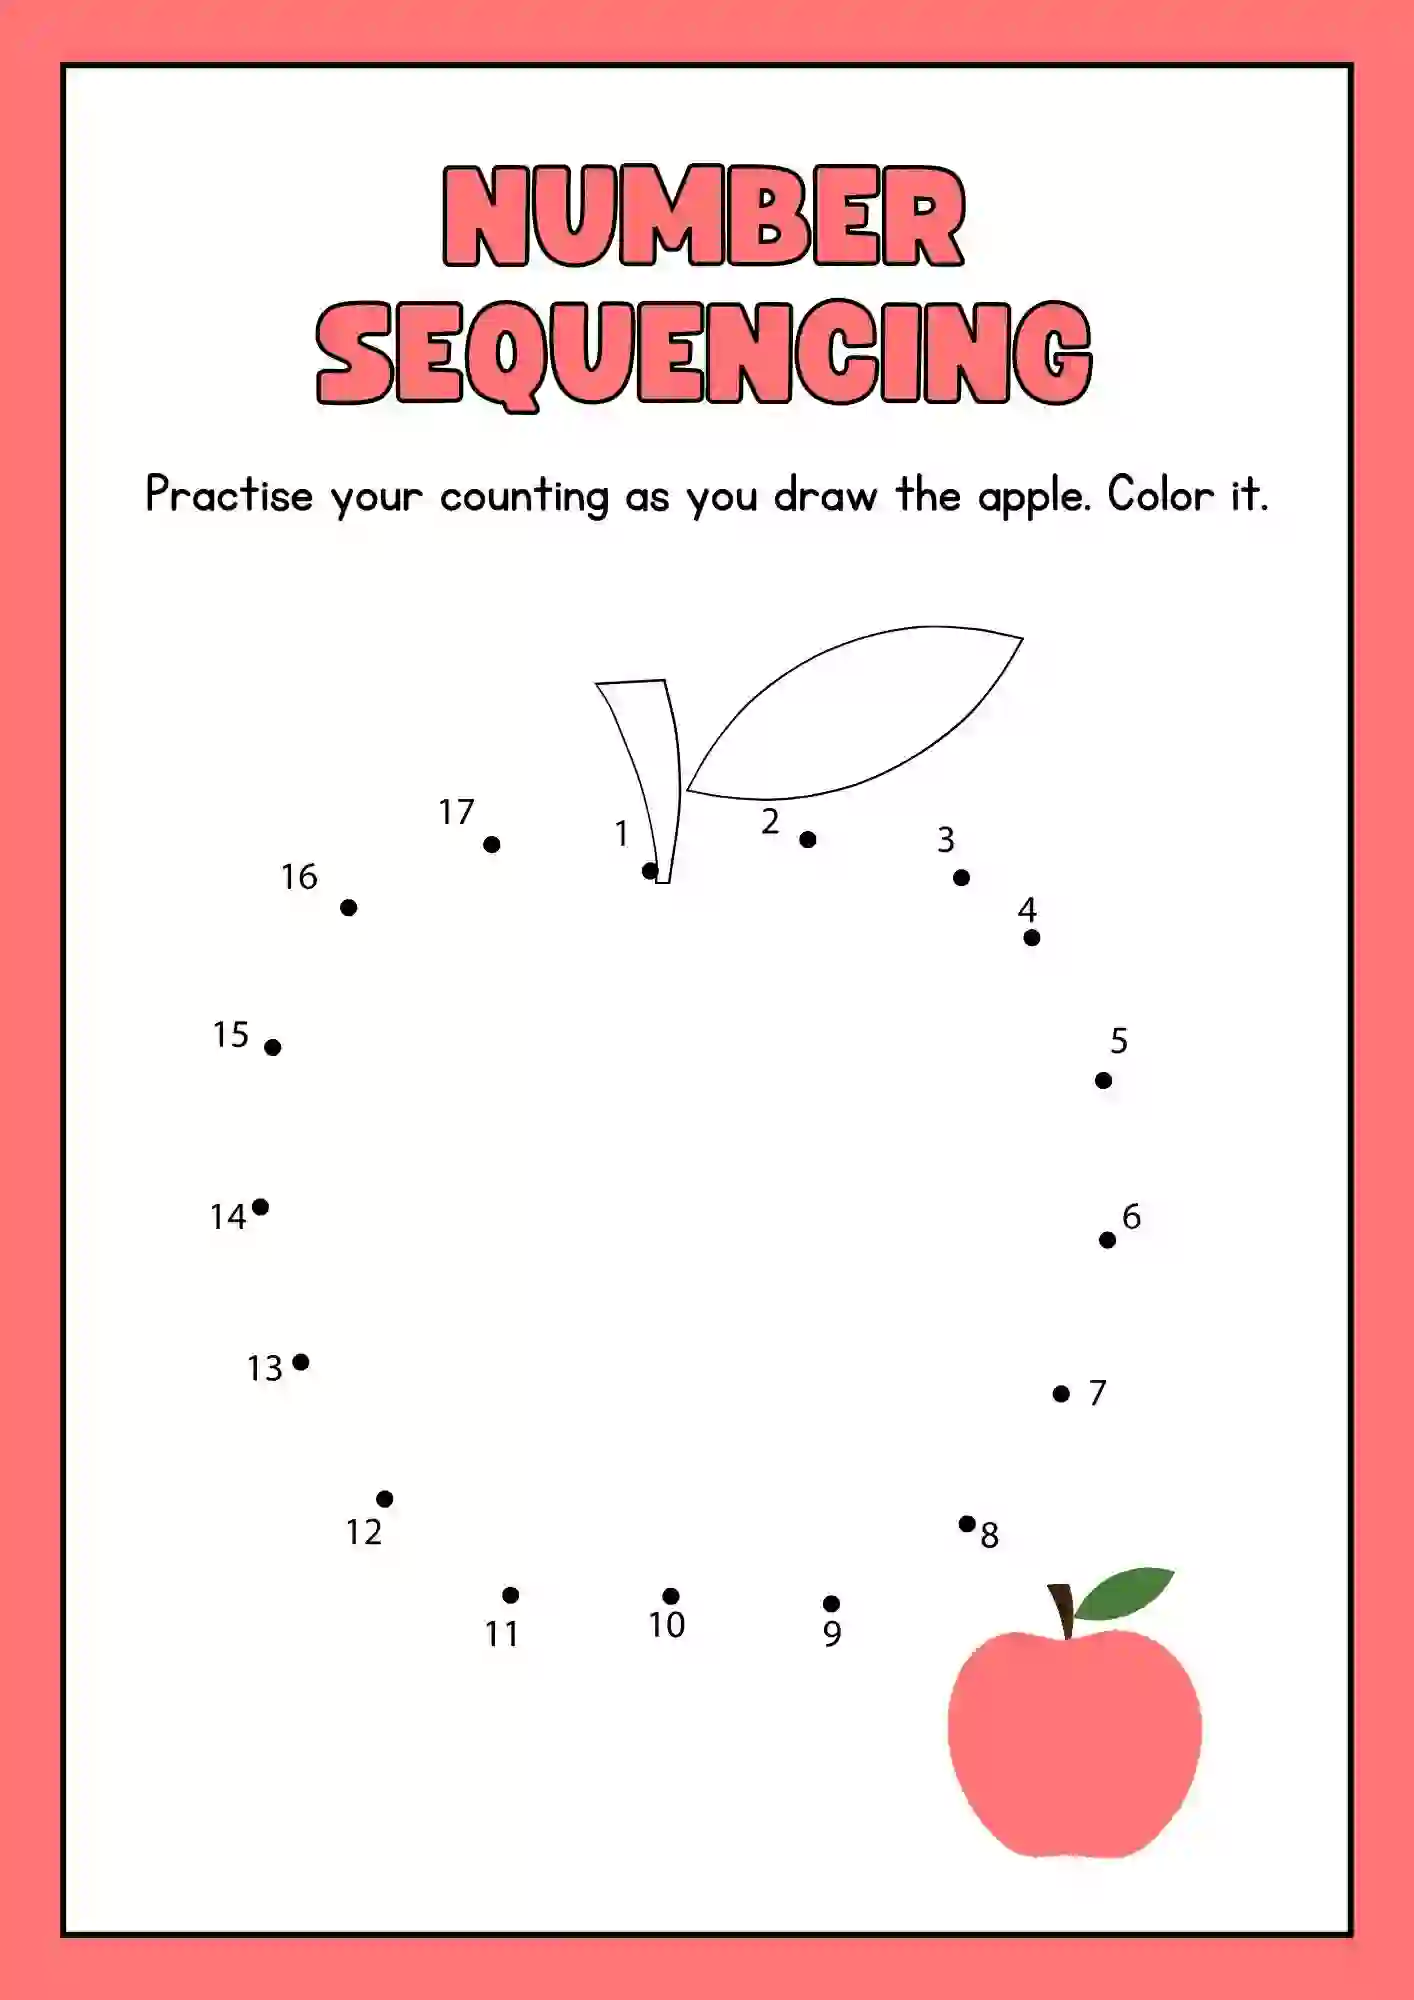 Number Sequencing Activity Worksheet trace and color the (apple)